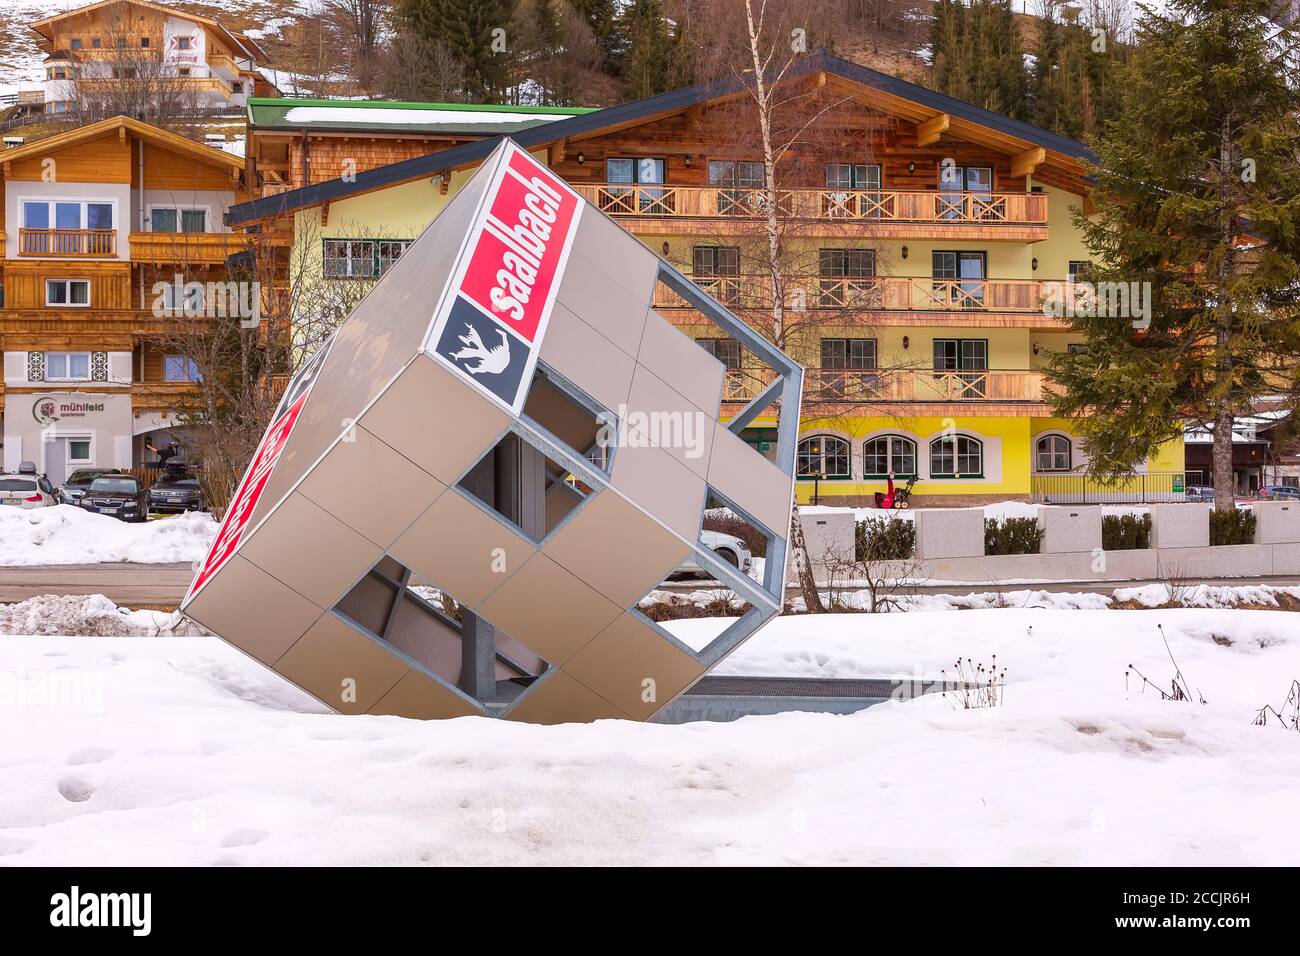 Saalbach, Austria - March 4, 2020: Cityscape in the austrian resort, big cube with name and houses Stock Photo